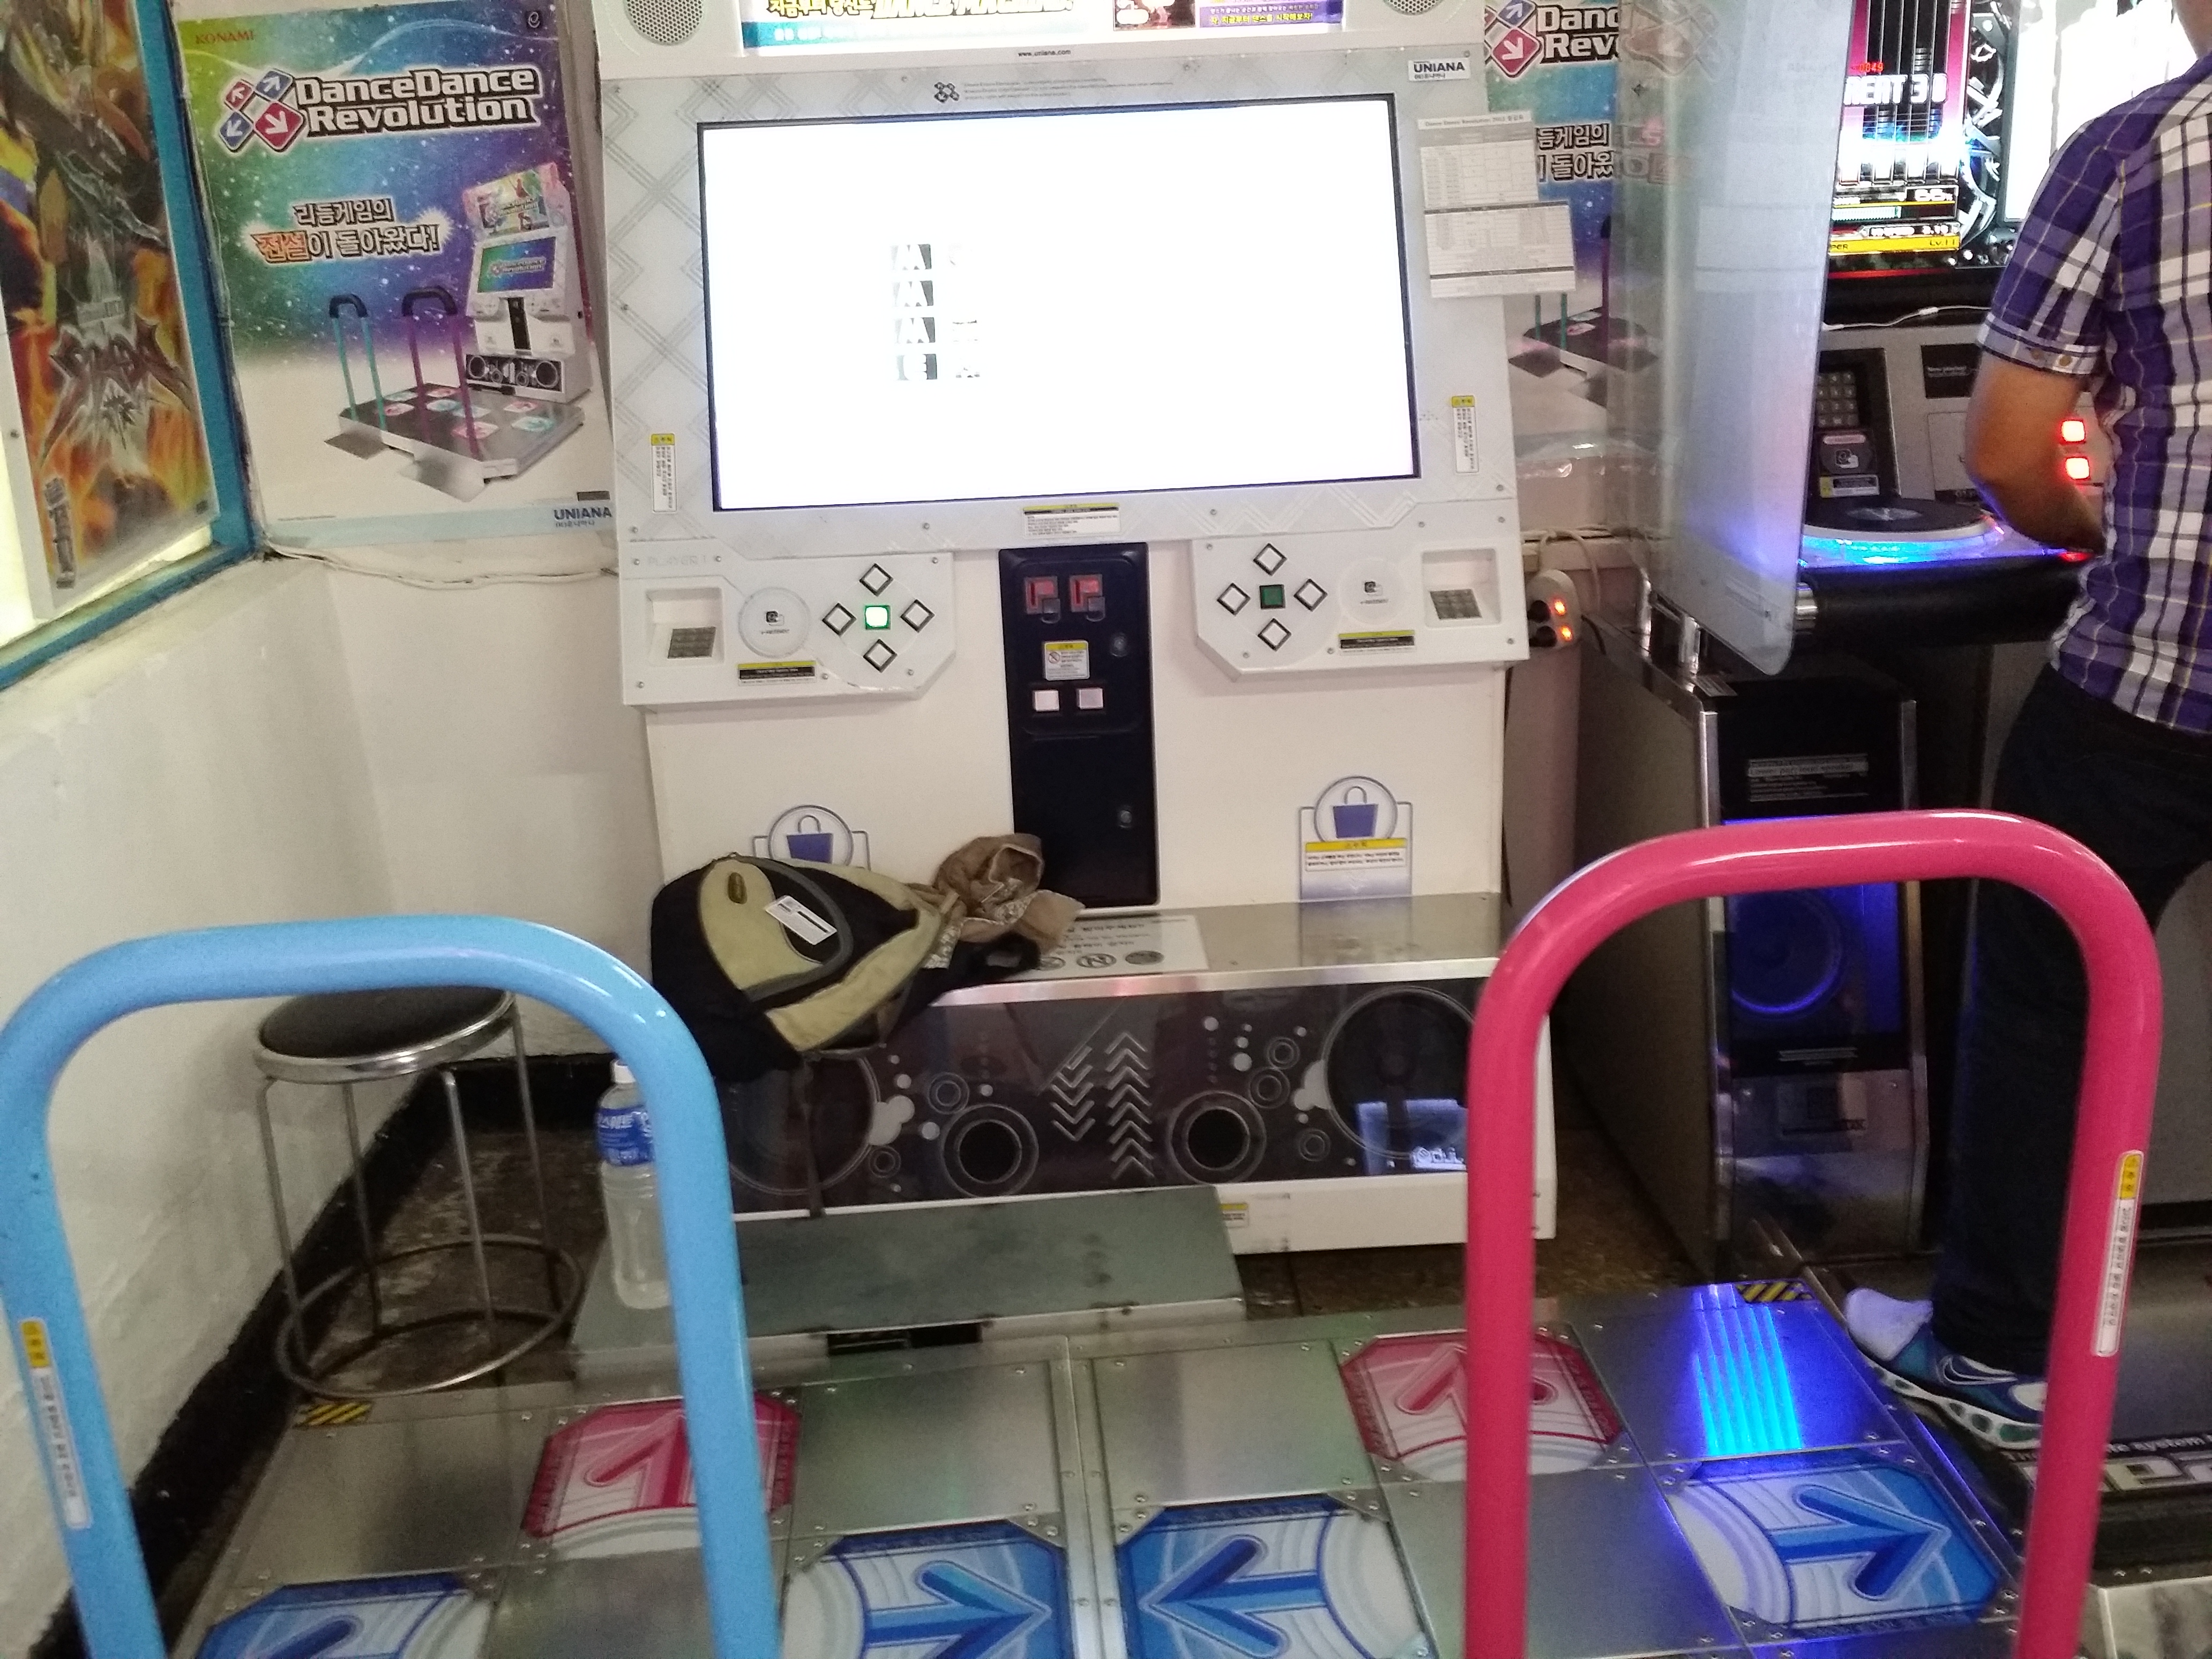 DDR 2013 updated to 2014